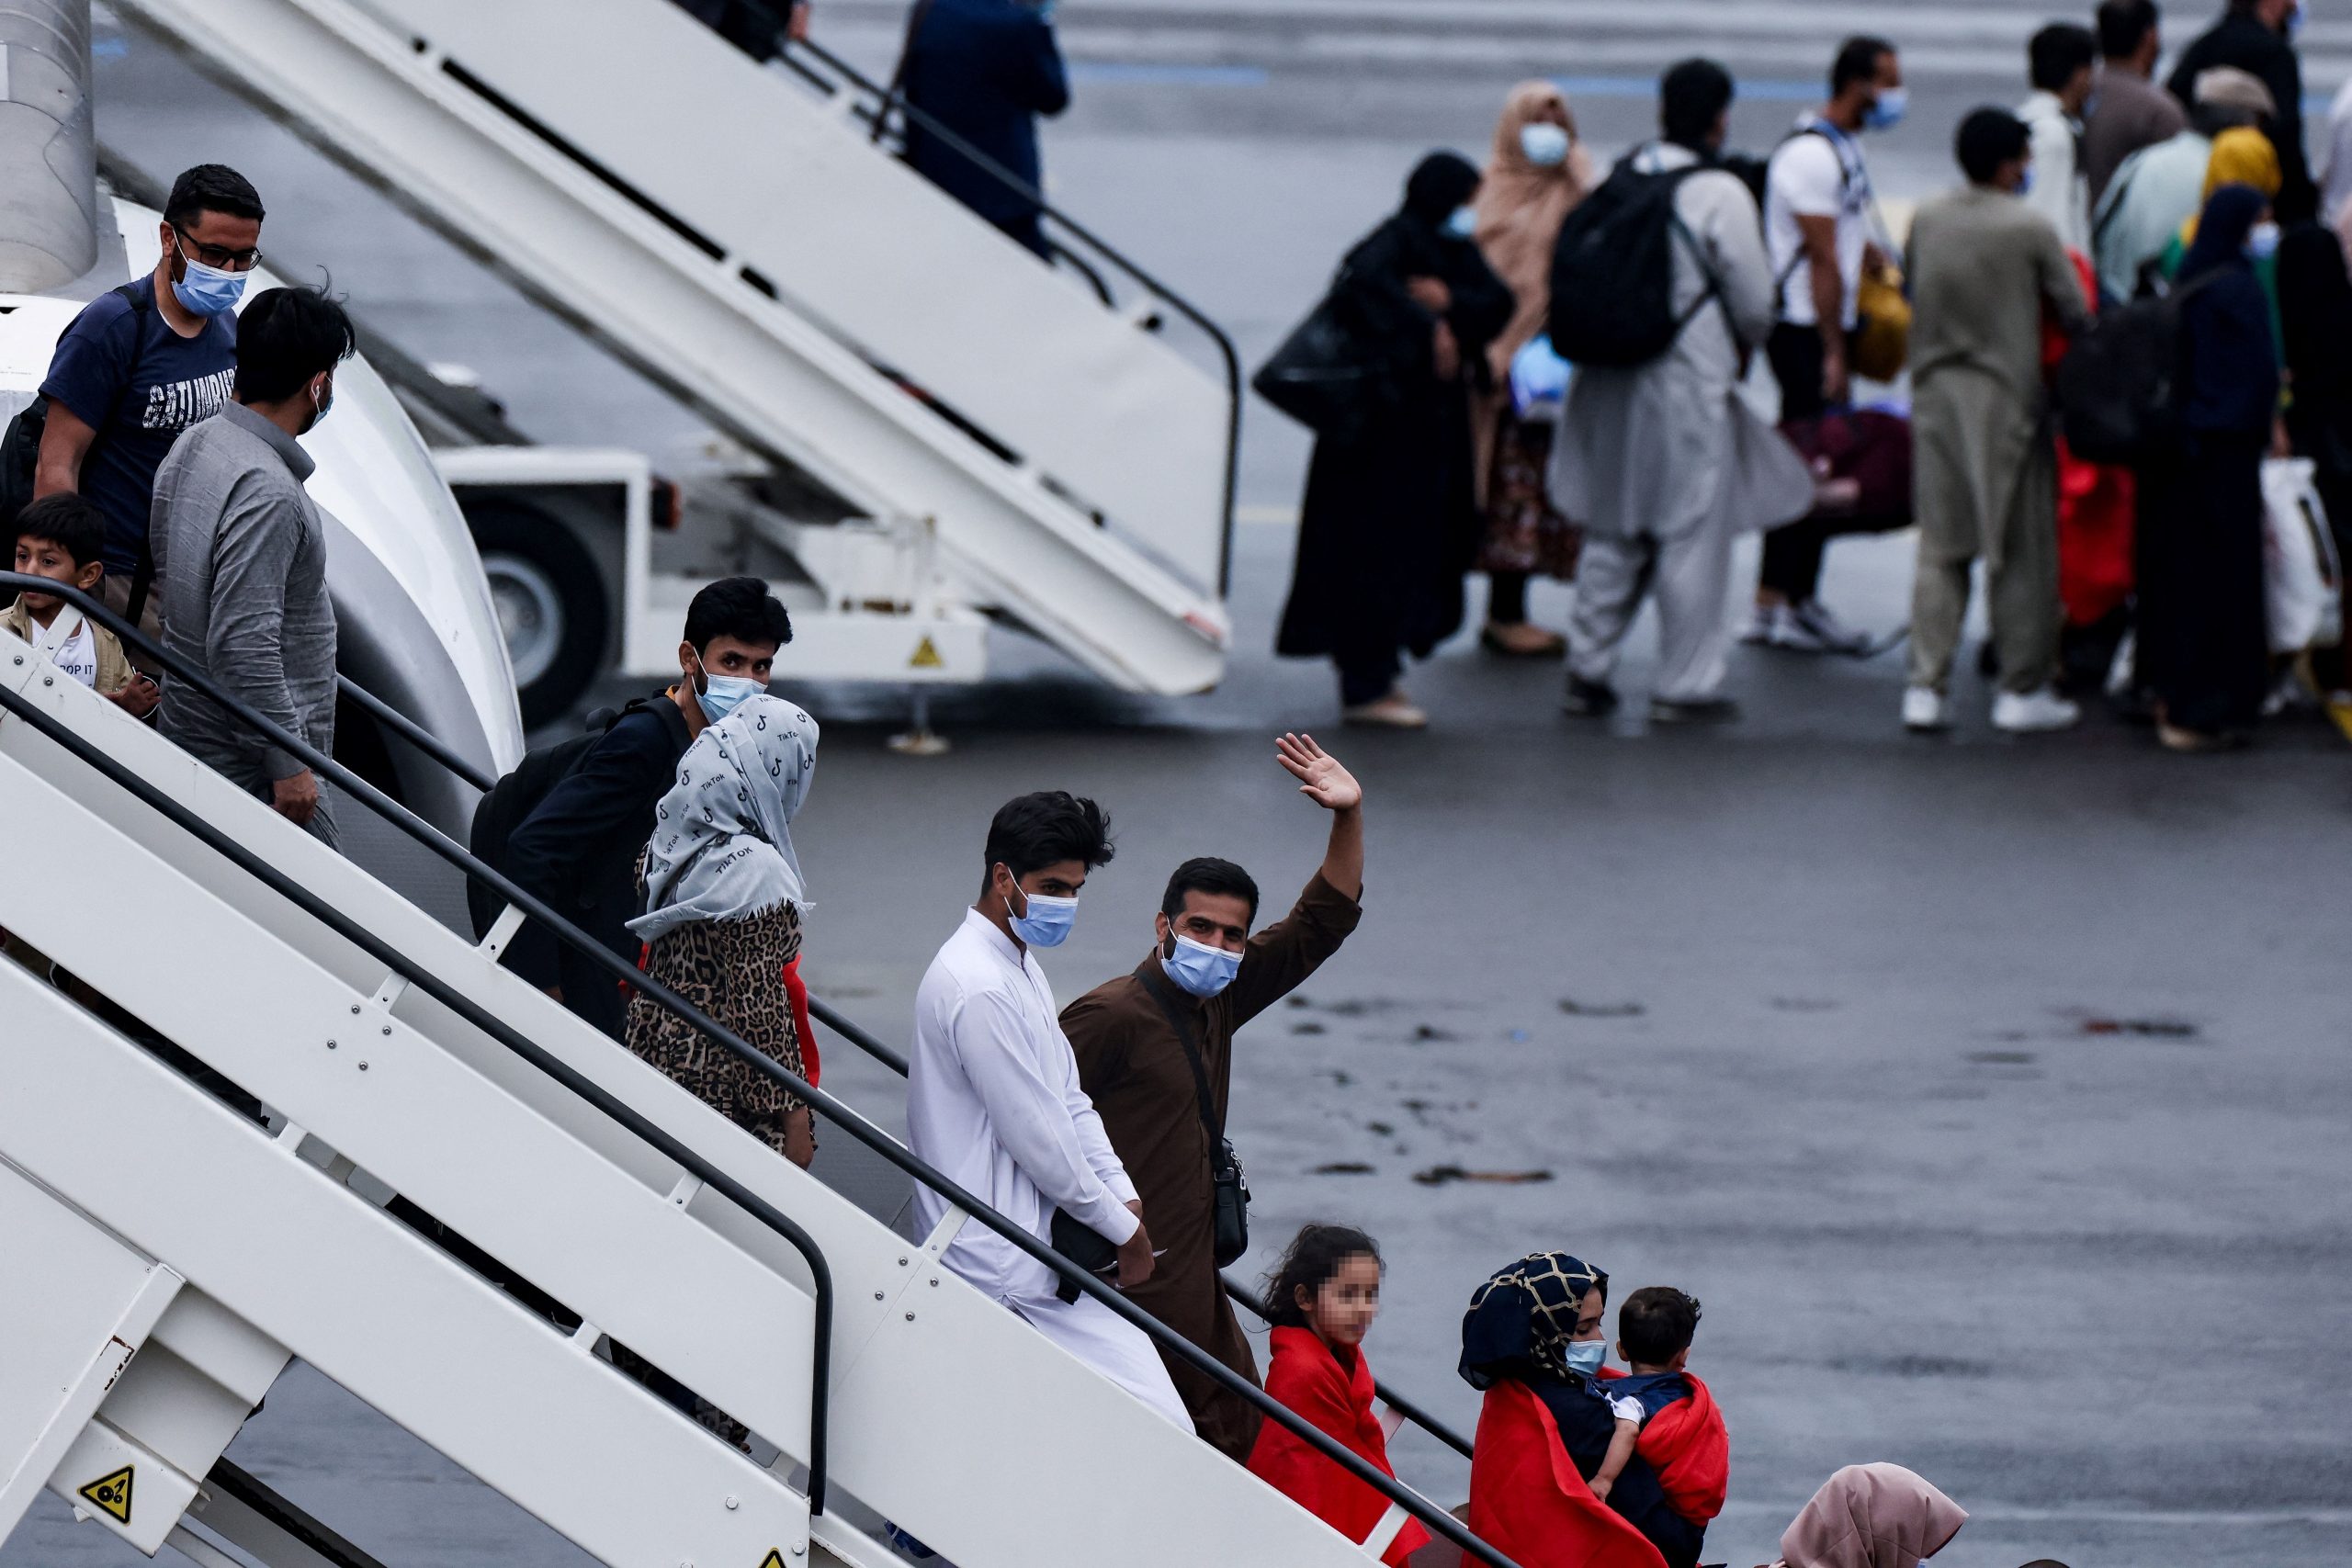 People descend the steps of an airplane wearing face masks while one waves to the camera.